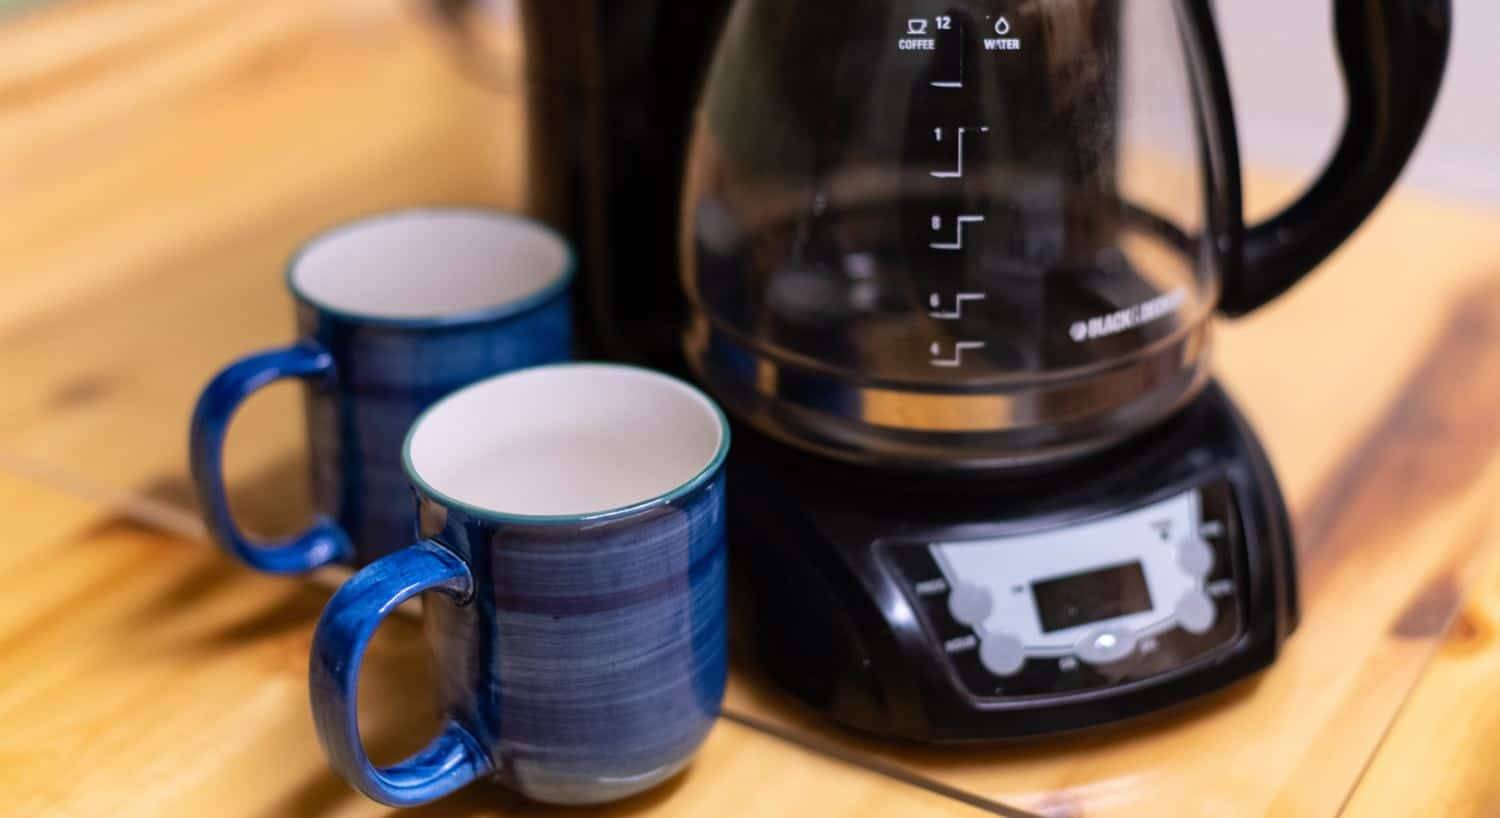 Close up view of two blue coffee mugs next to a coffee pot on a wooden counter